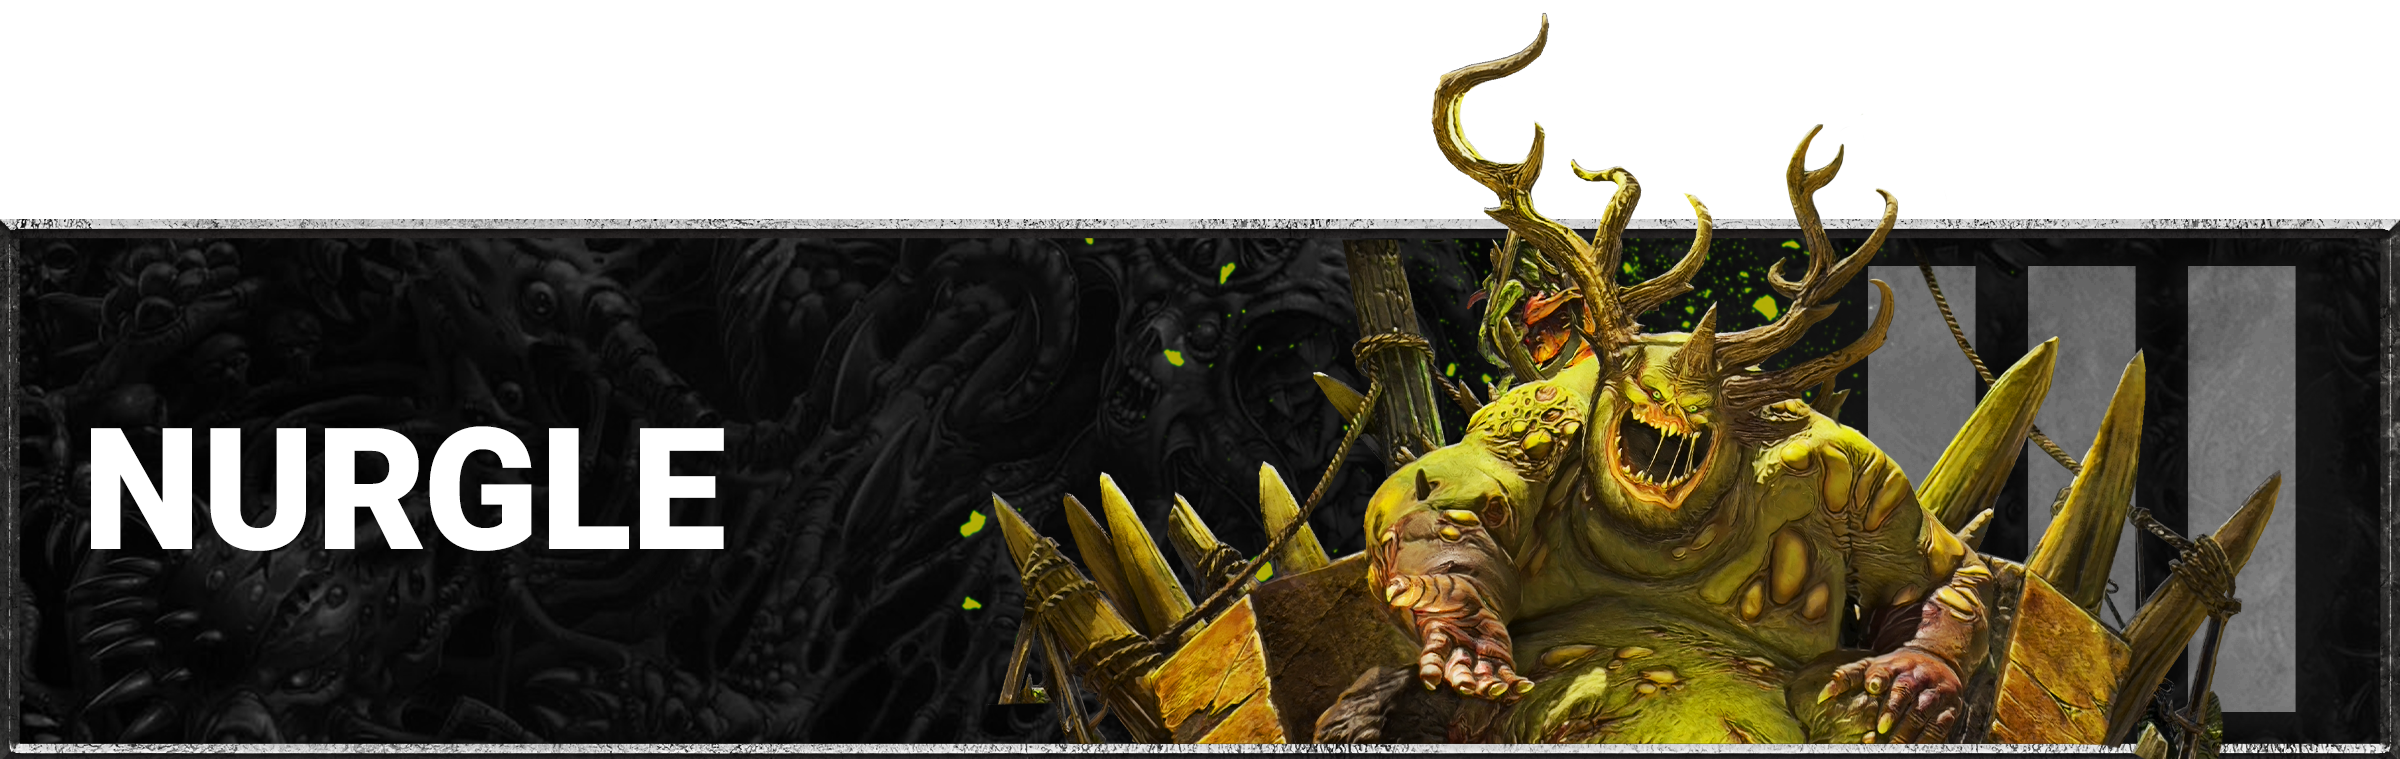 Balance changes to the NURGLE race and factions, available to owners of Total War: WARHAMMER III.